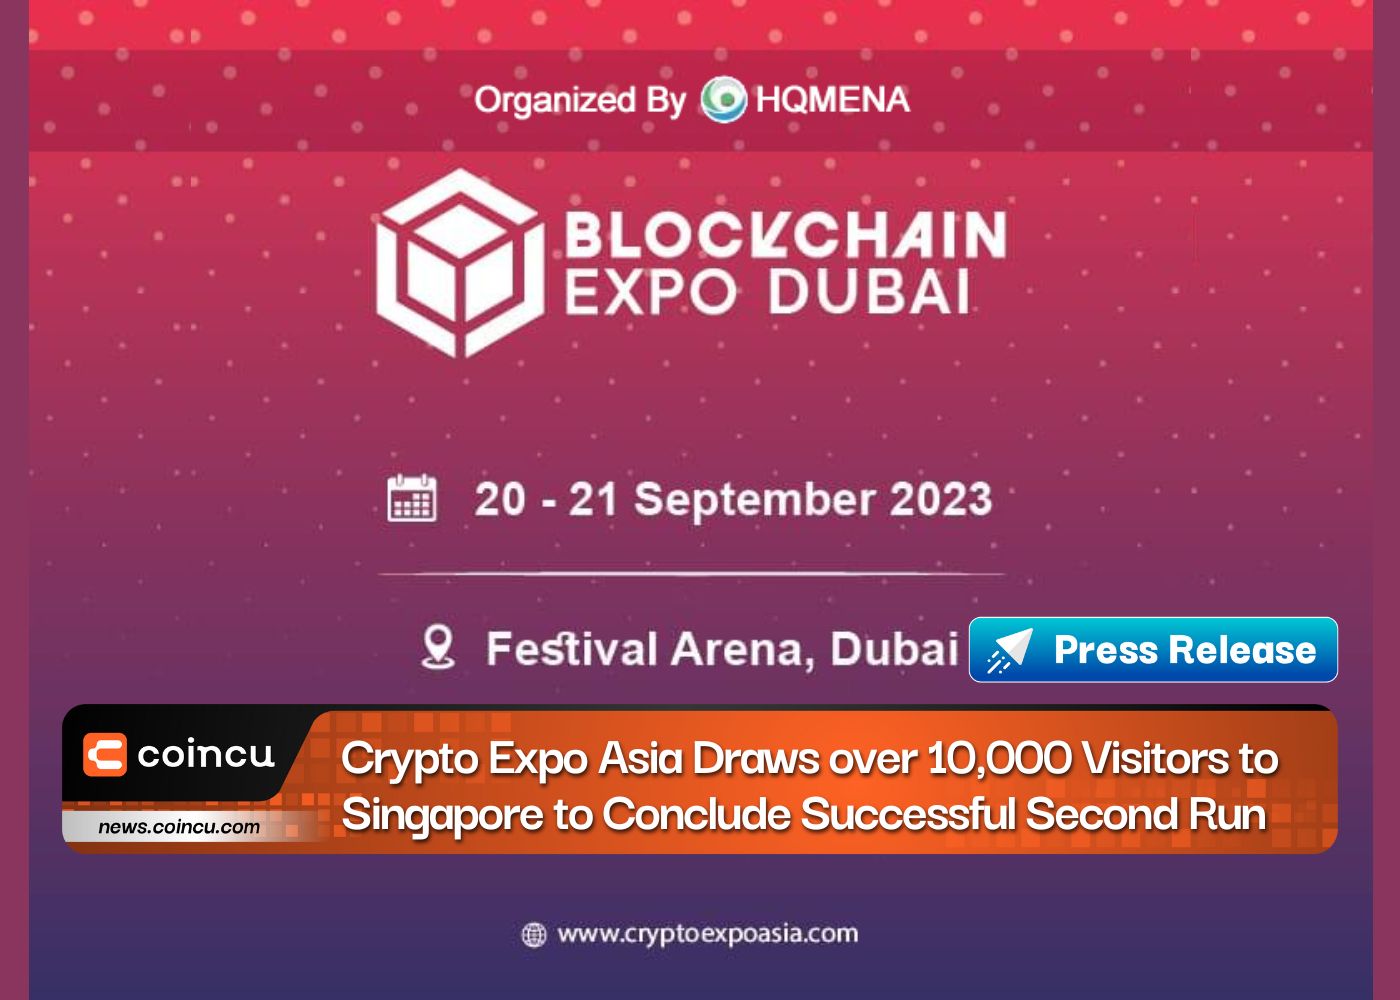 Crypto Expo Asia Draws over 10,000 Visitors to Singapore to Conclude Successful Second Run